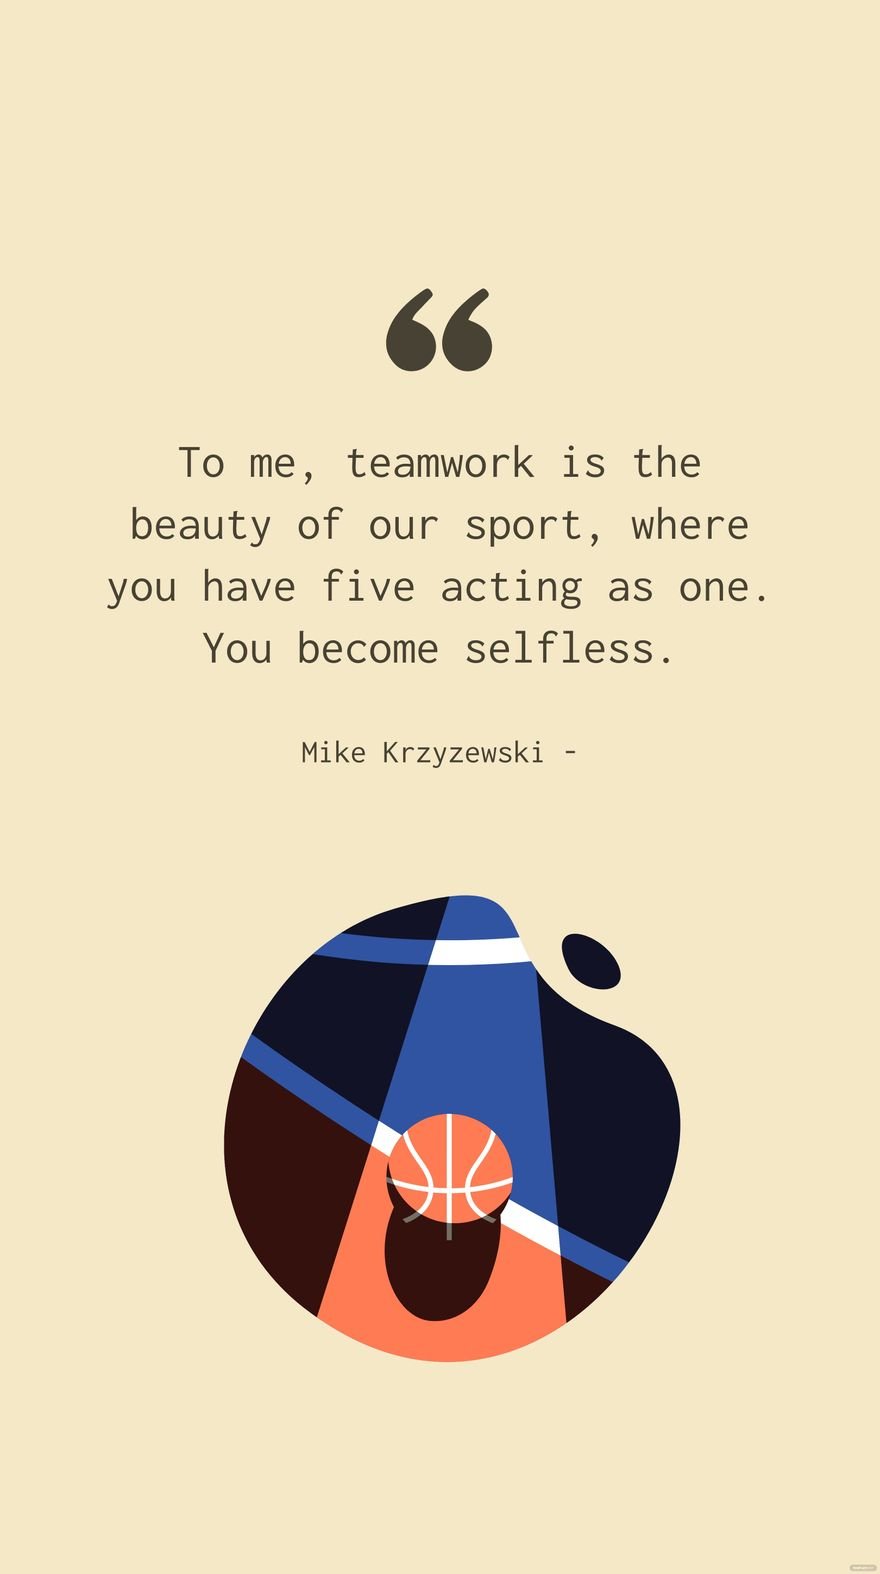 Free Mike Krzyzewski - To me, teamwork is the beauty of our sport, where you have five acting as one. You become selfless.